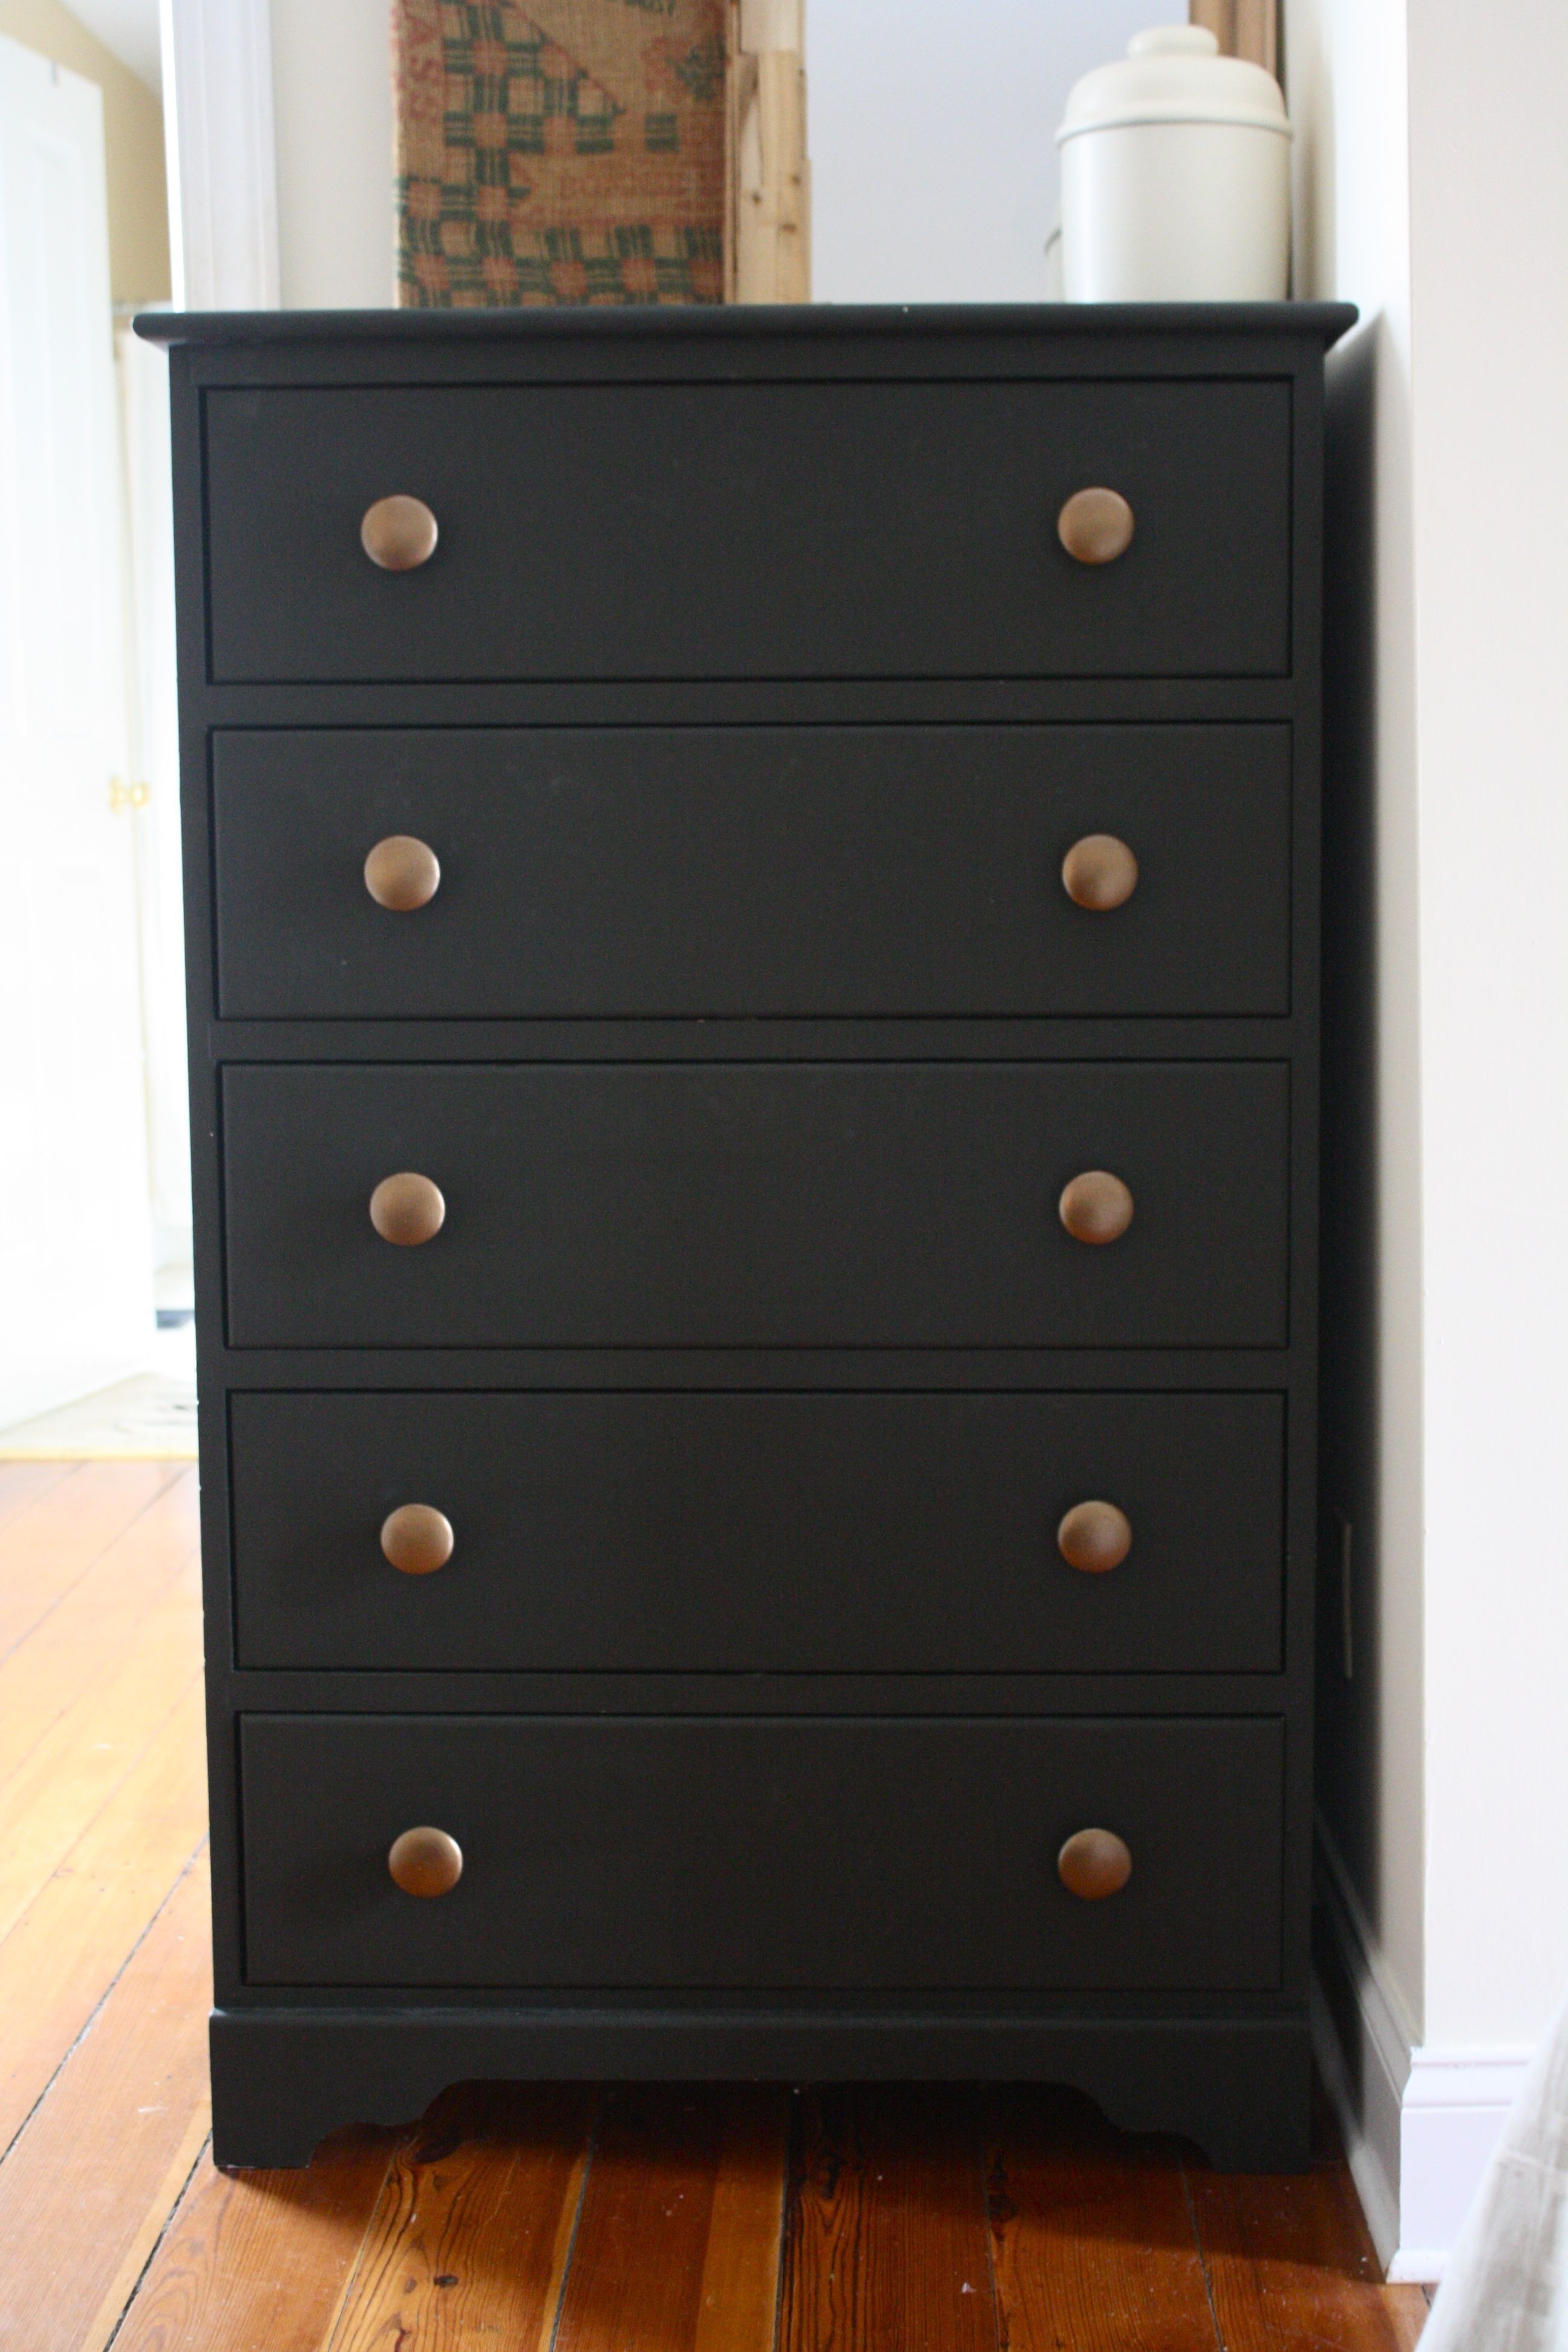 Matte Black Painted Dresser Using Flat Black Paint | Home Decor With Satin Black & Painted White Sideboards (View 3 of 30)